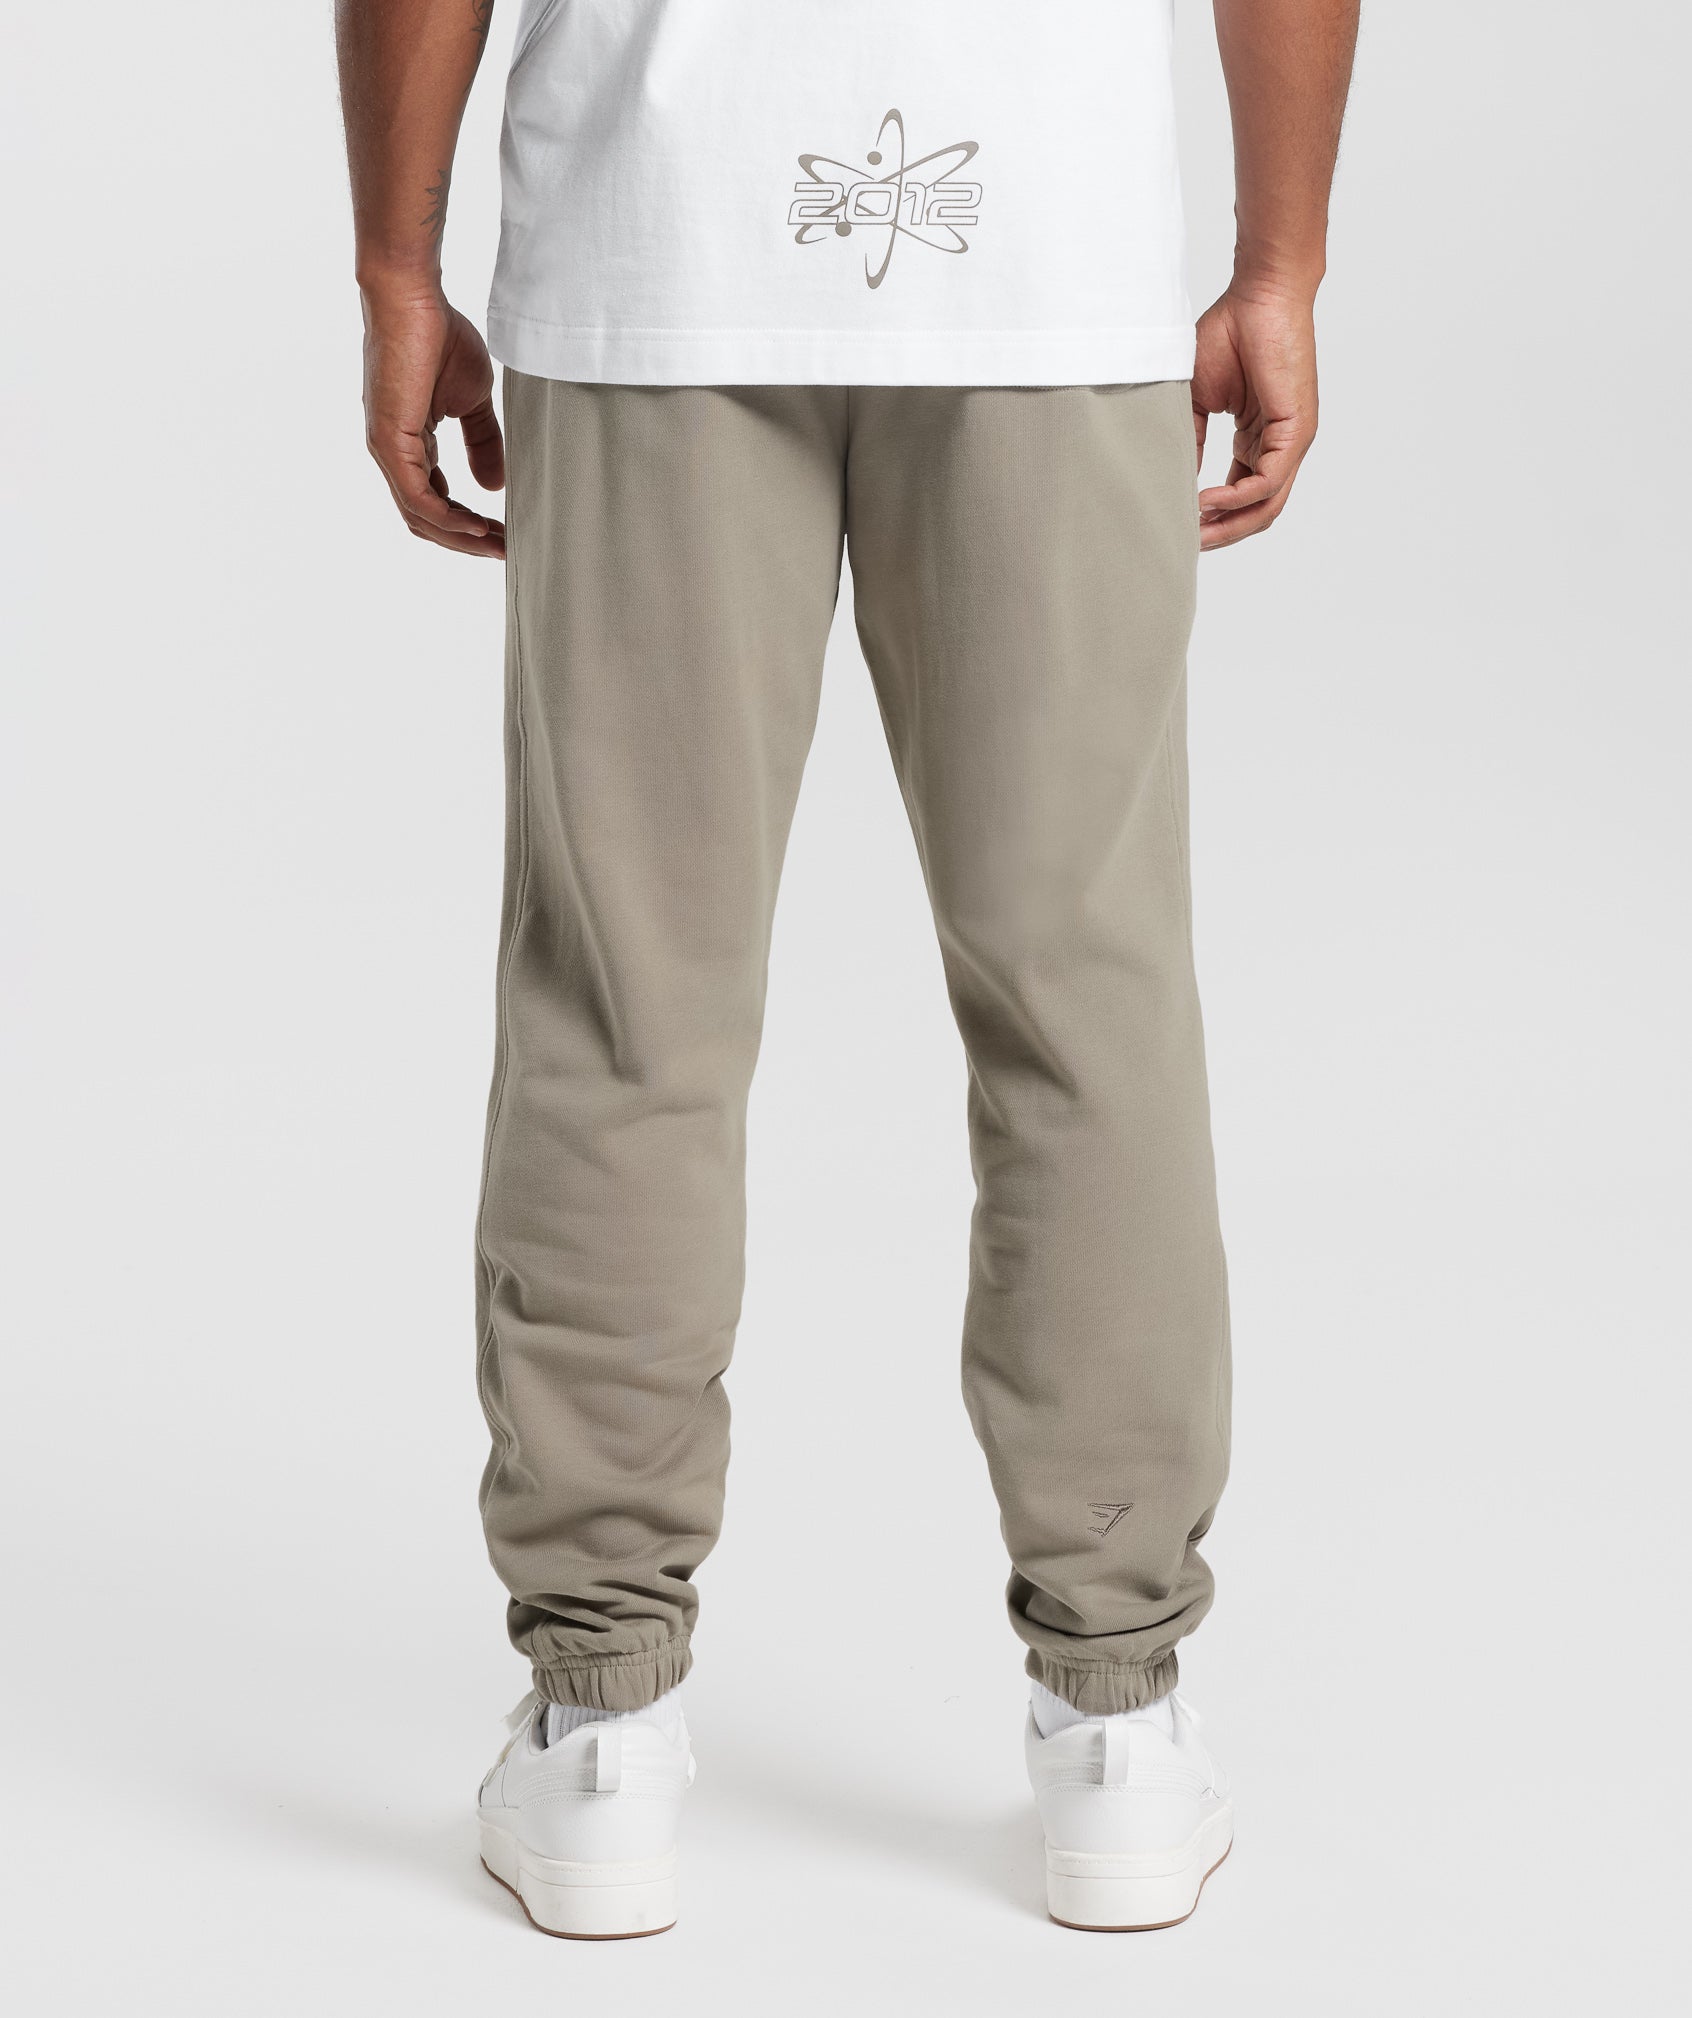 Rest Day Essentials Joggers in Linen Brown - view 2